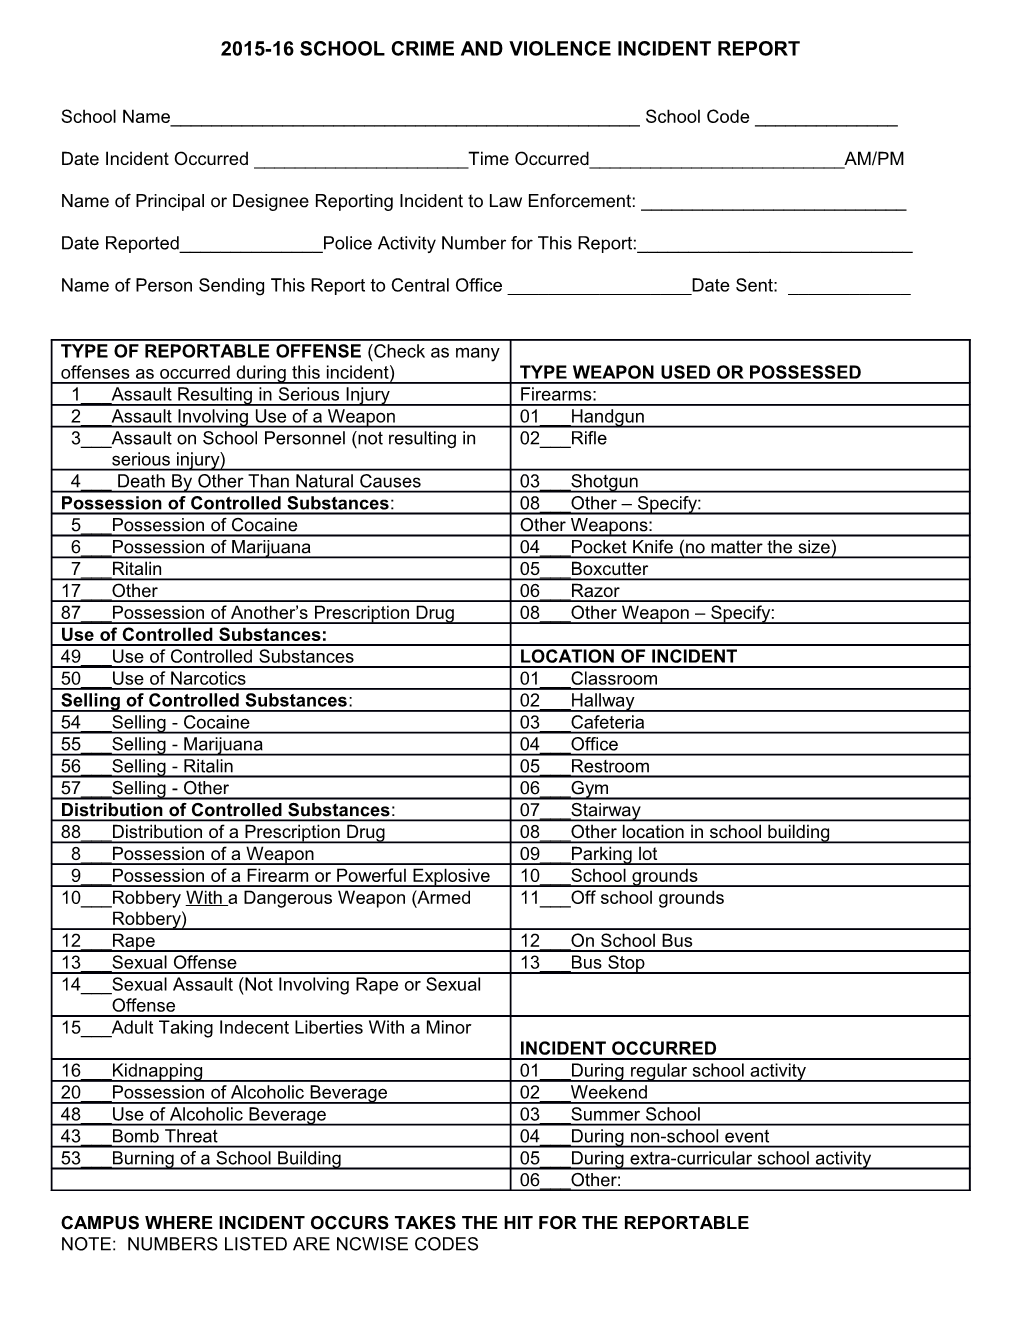 2008-2009 School Crime and Violence Incident Report